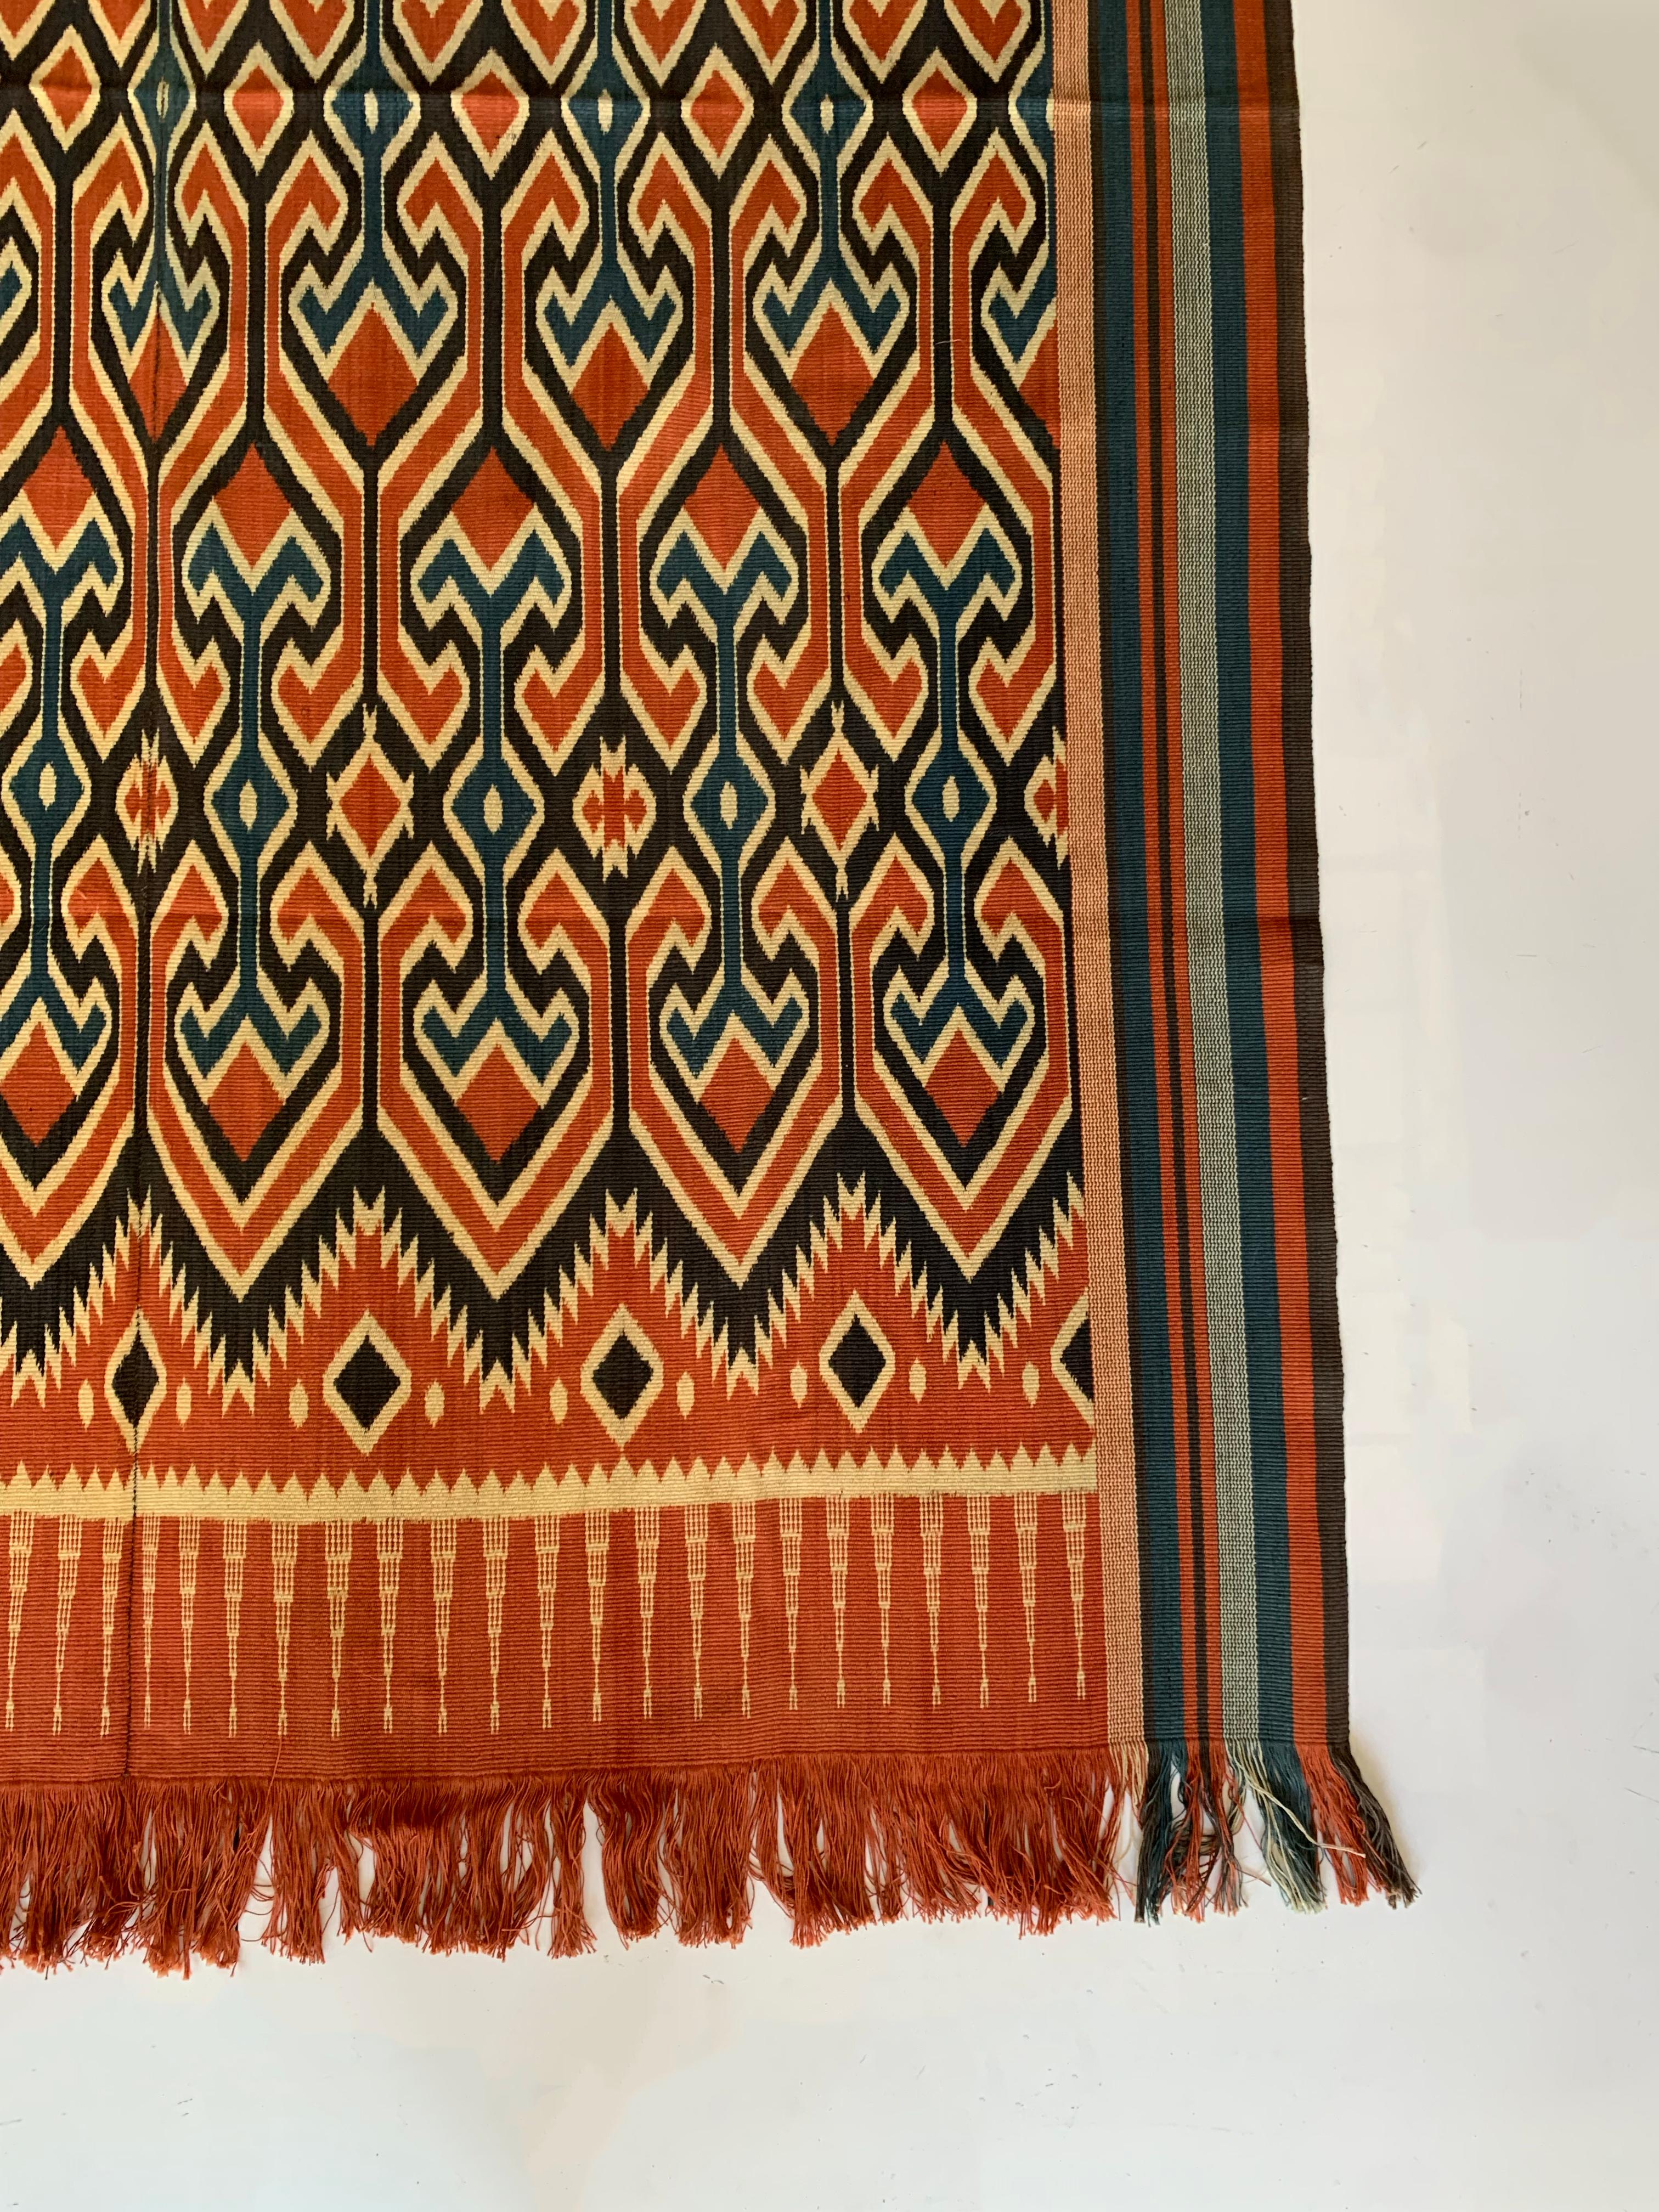 Hand-Woven Ikat Textile from Toraja Tribe of Sulawesi with Stunning Tribal Motifs